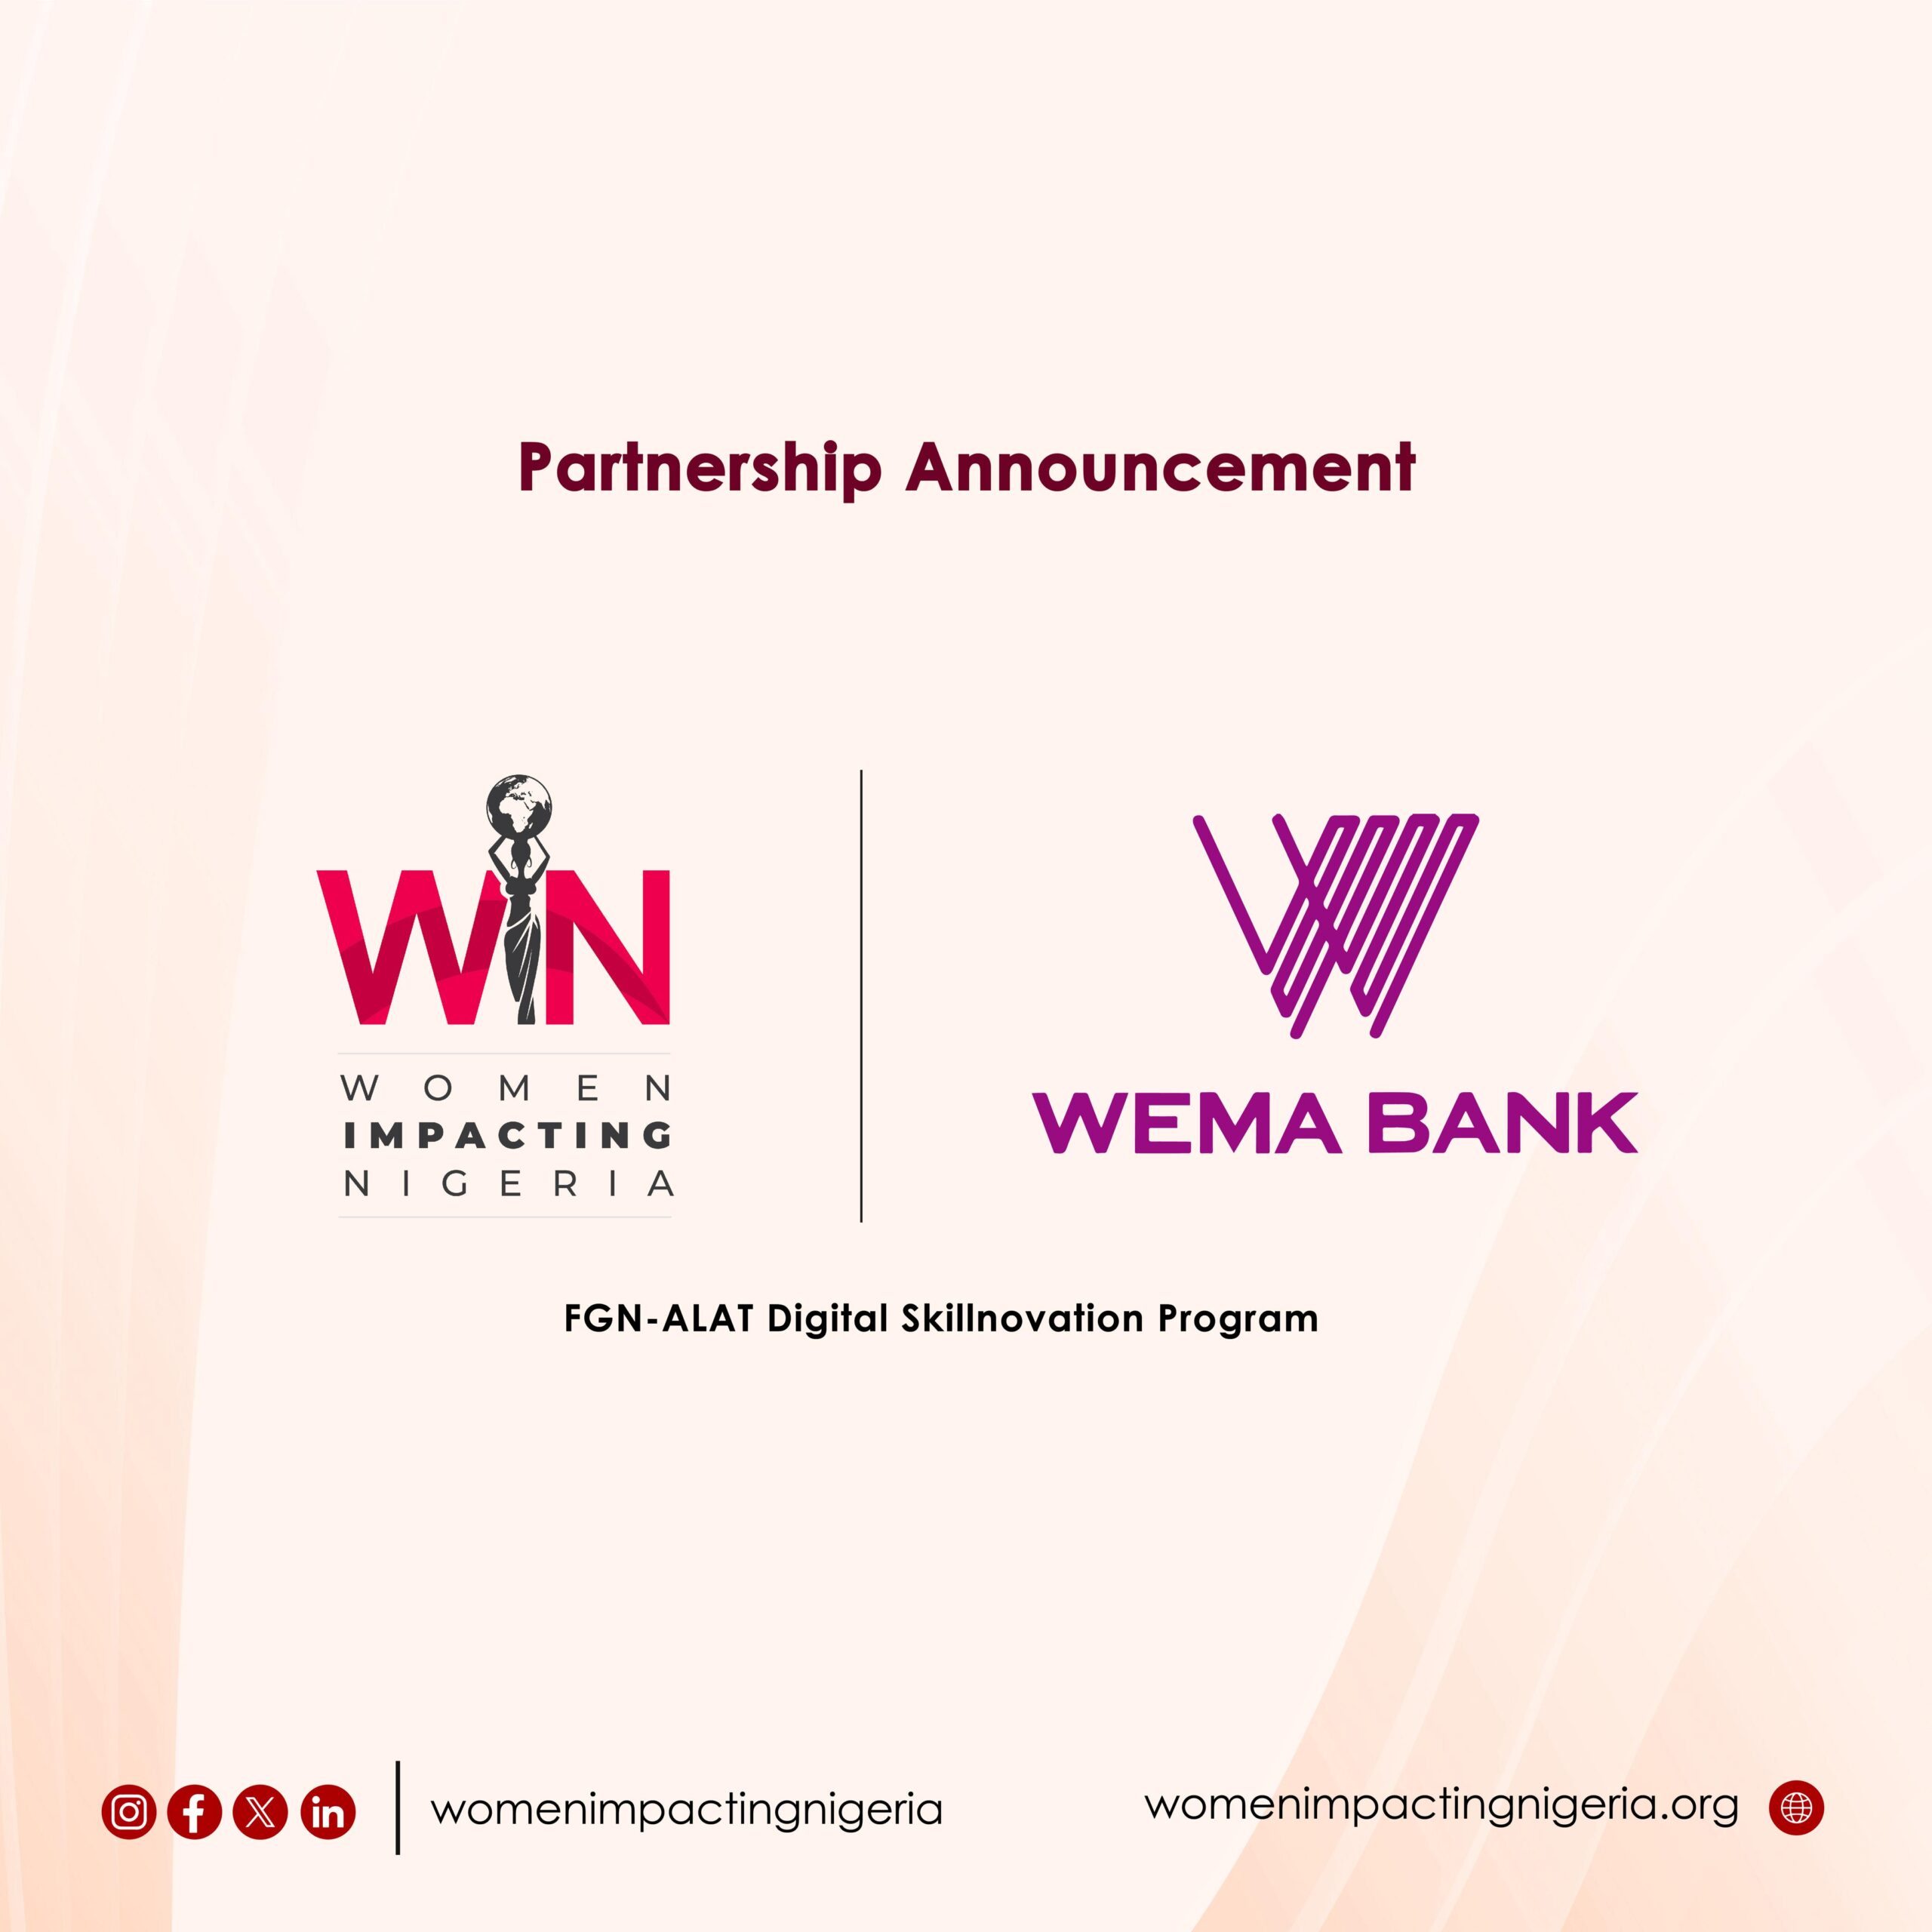 Women impacting Nigeria and Wema Bank join forces for youth and women empowerment